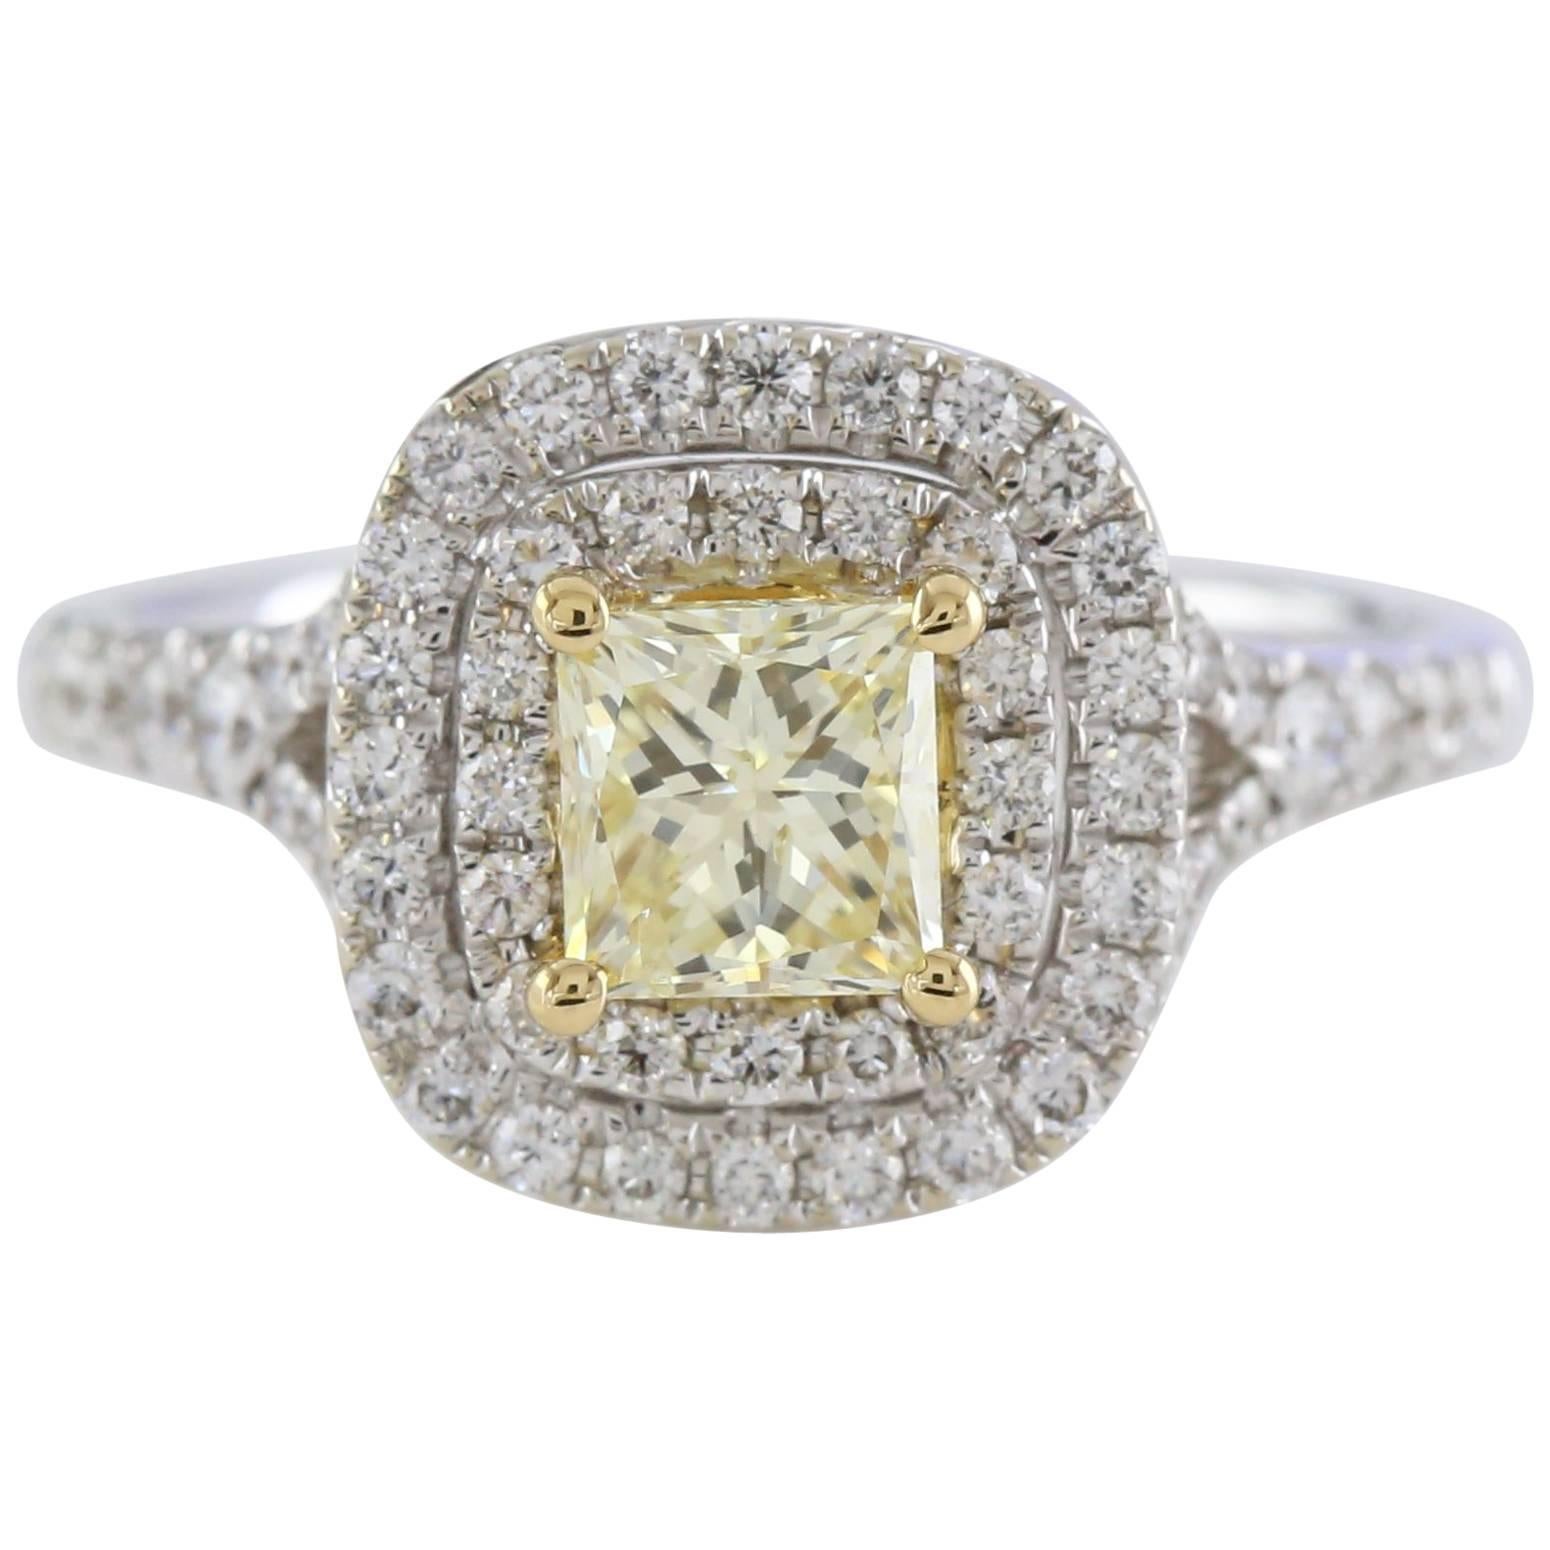 Fancy Yellow HRD Certificated 0.96 Carat Diamond Ring For Sale